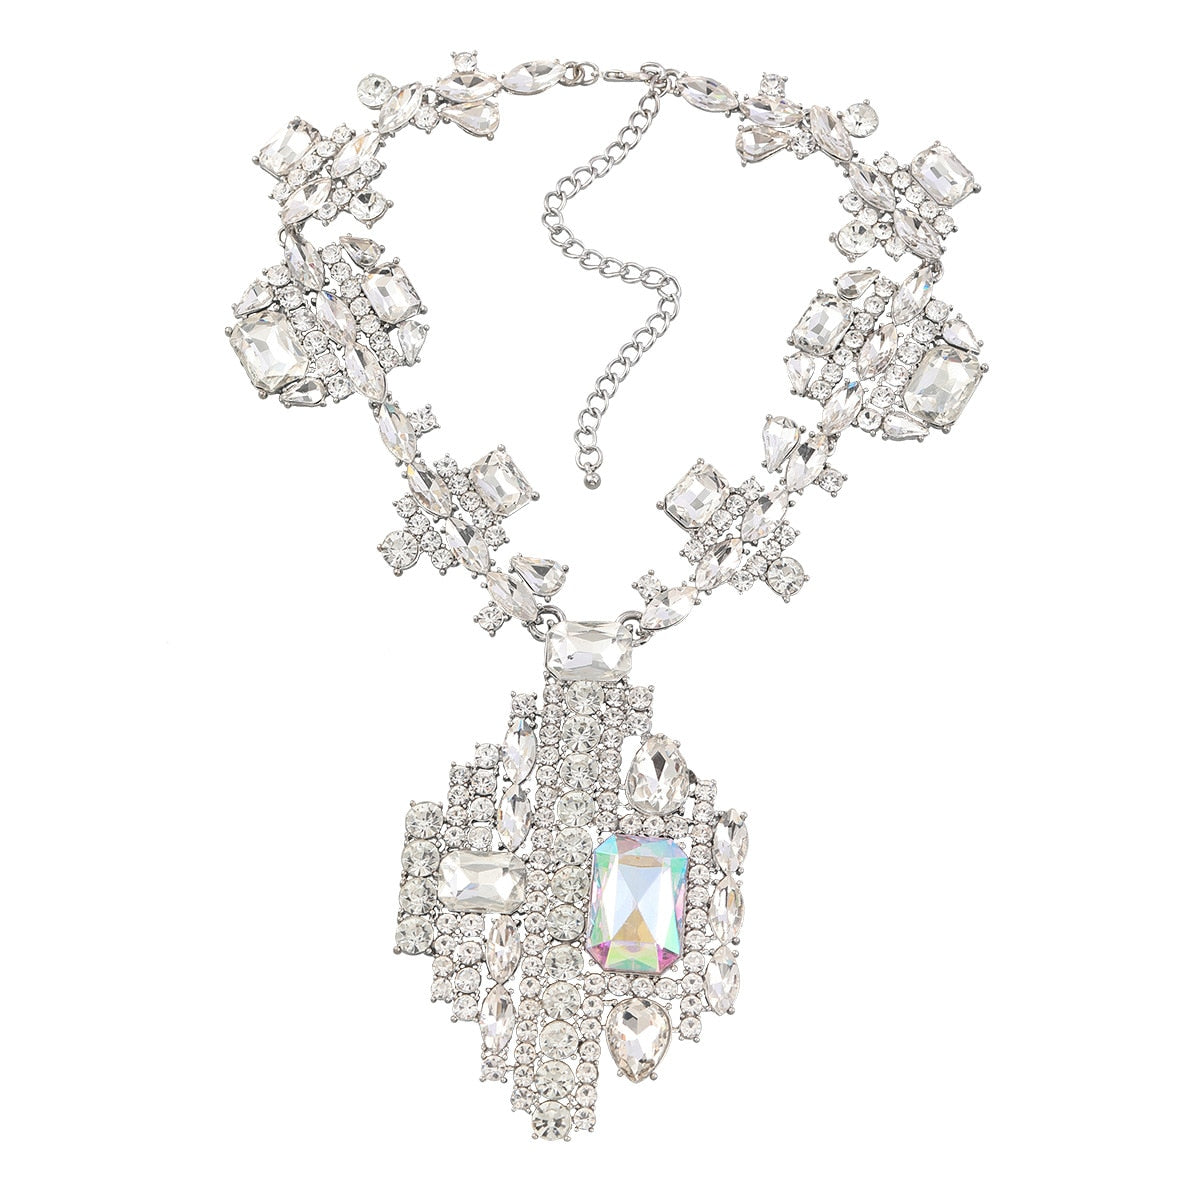 Baroque Style Crystal Gems Necklace